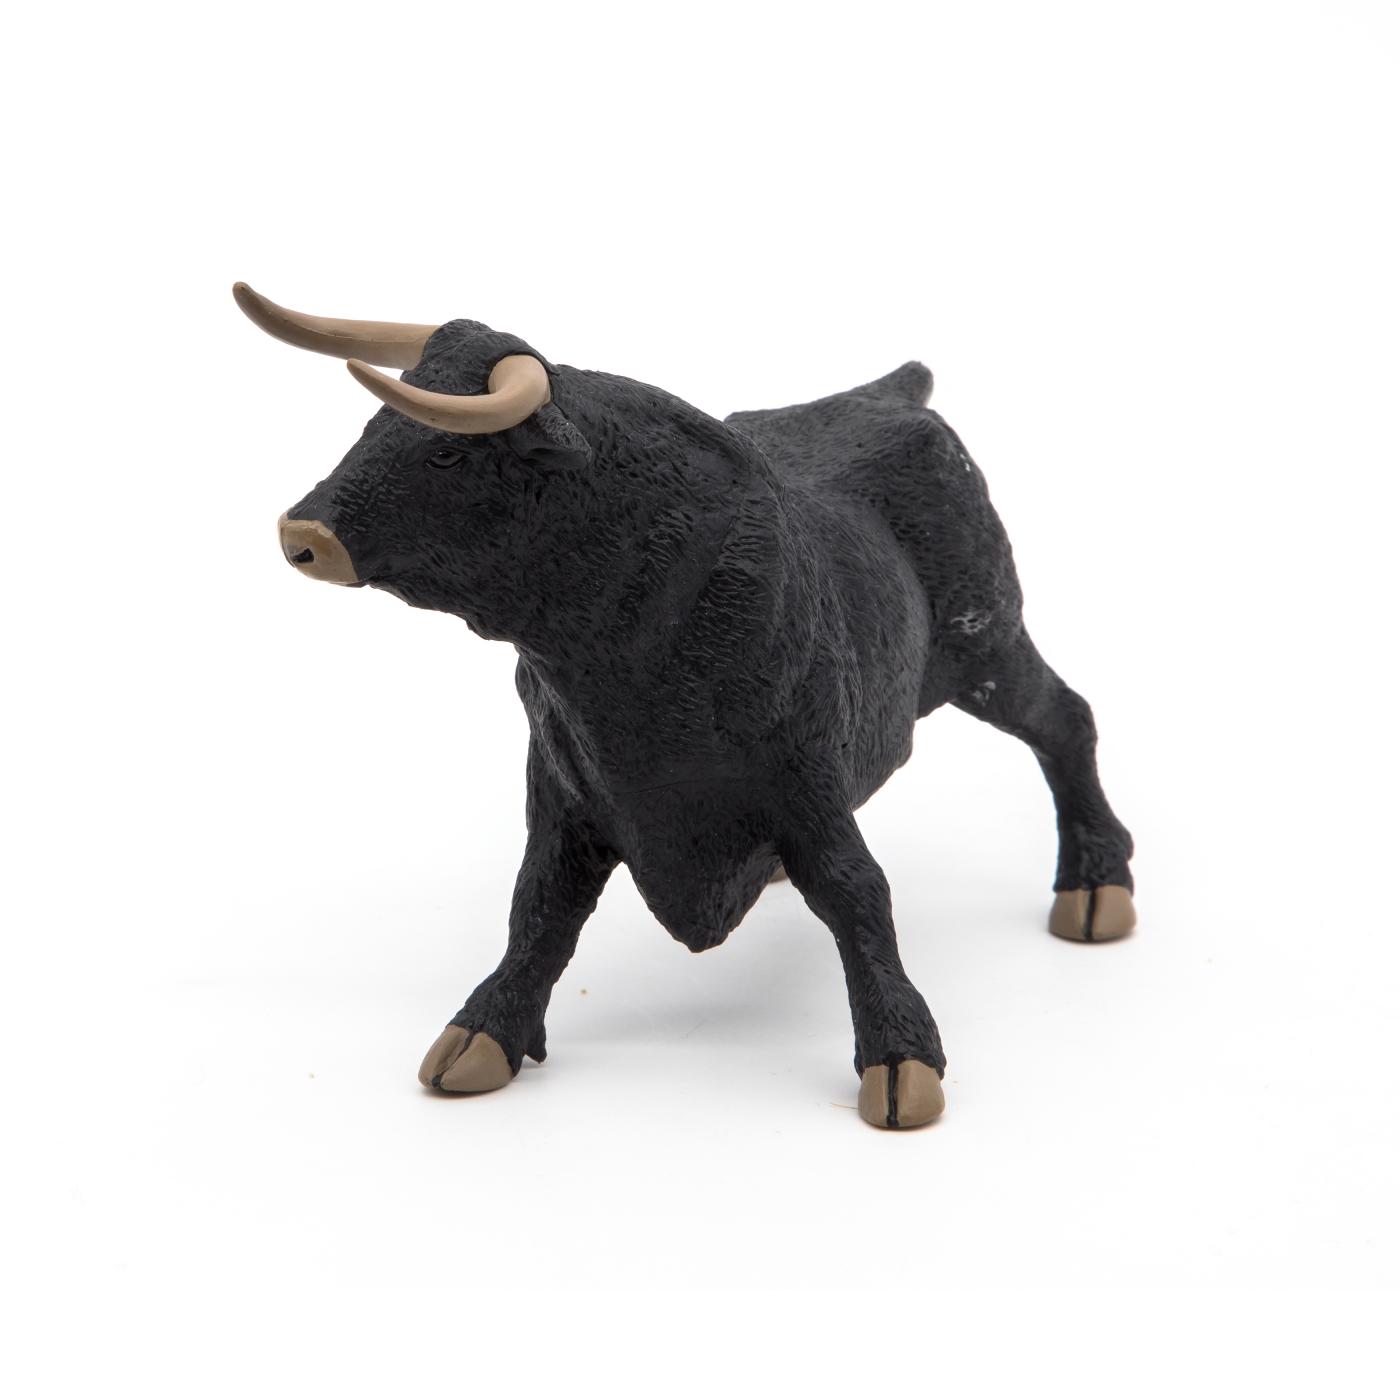 Papo Andalusian Fighting Bull Figure Wildlife Toy Replica 51050 NEW 